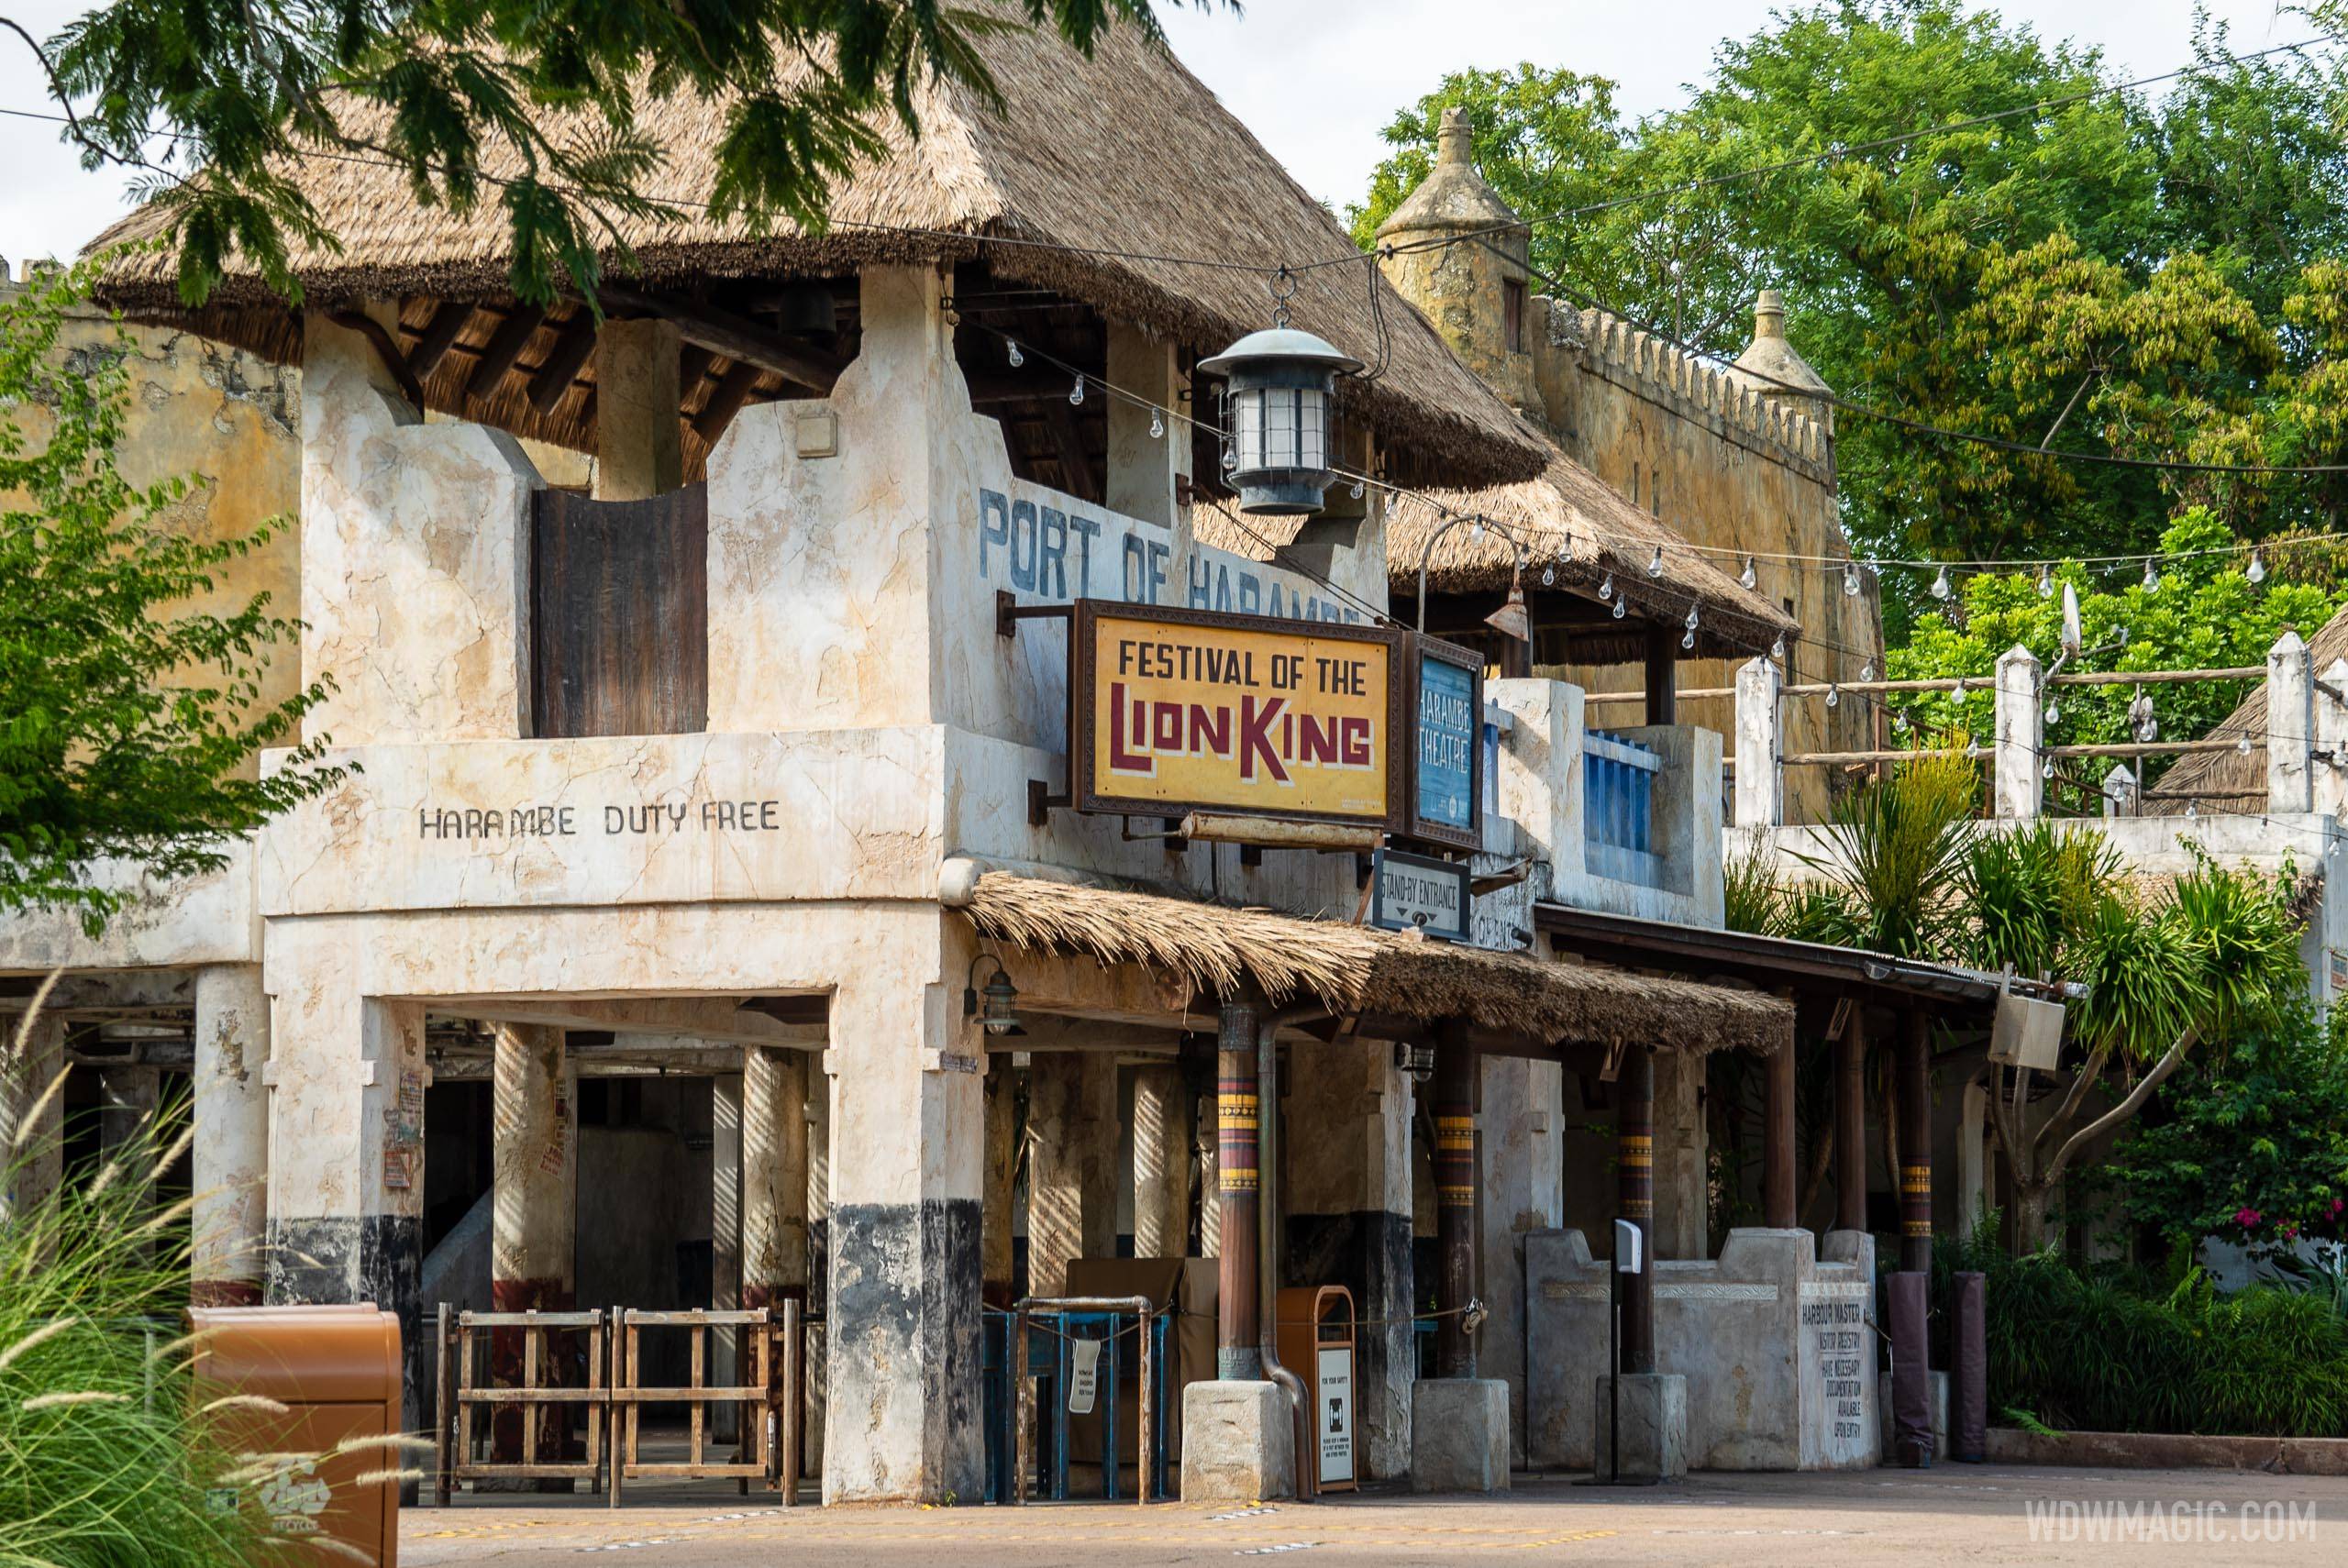 VIDEO - Festival of the Lion King opens in the new Harambe Theatre